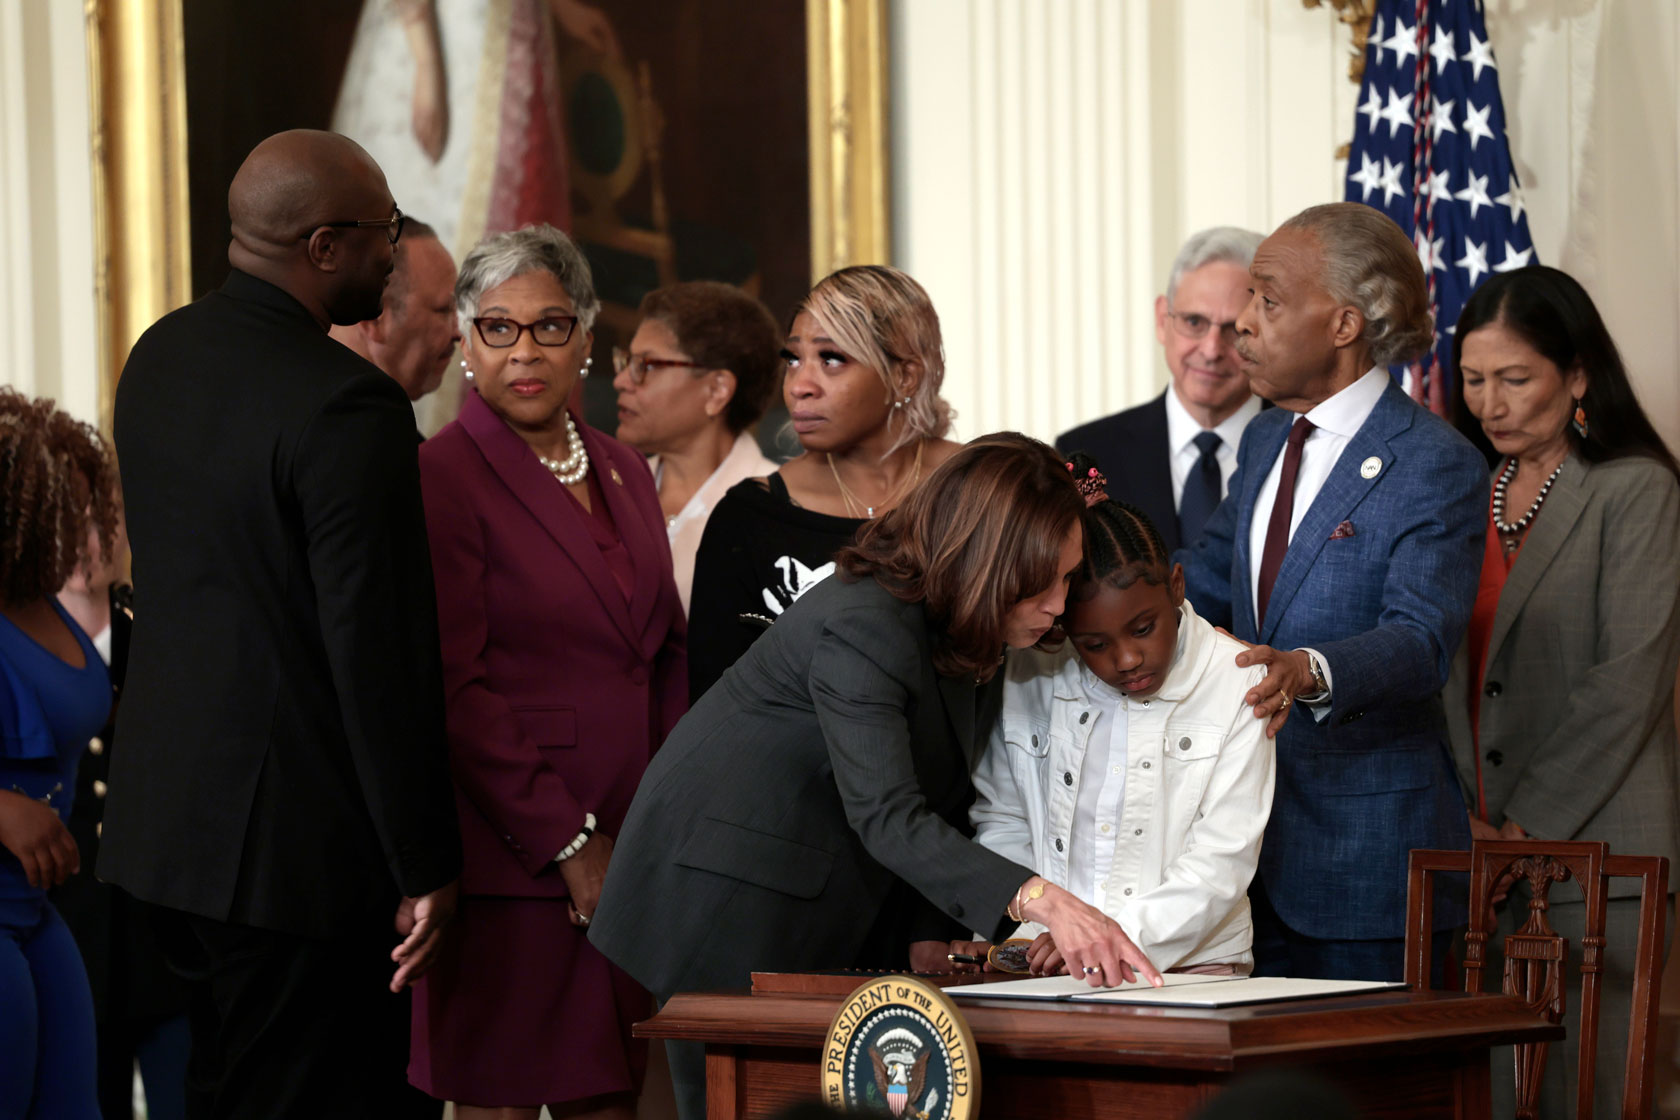 Vice President Kamala Harris speaks to Gianna Floyd, the daughter of George Floyd, after an executive order signing event enacting further police reform.